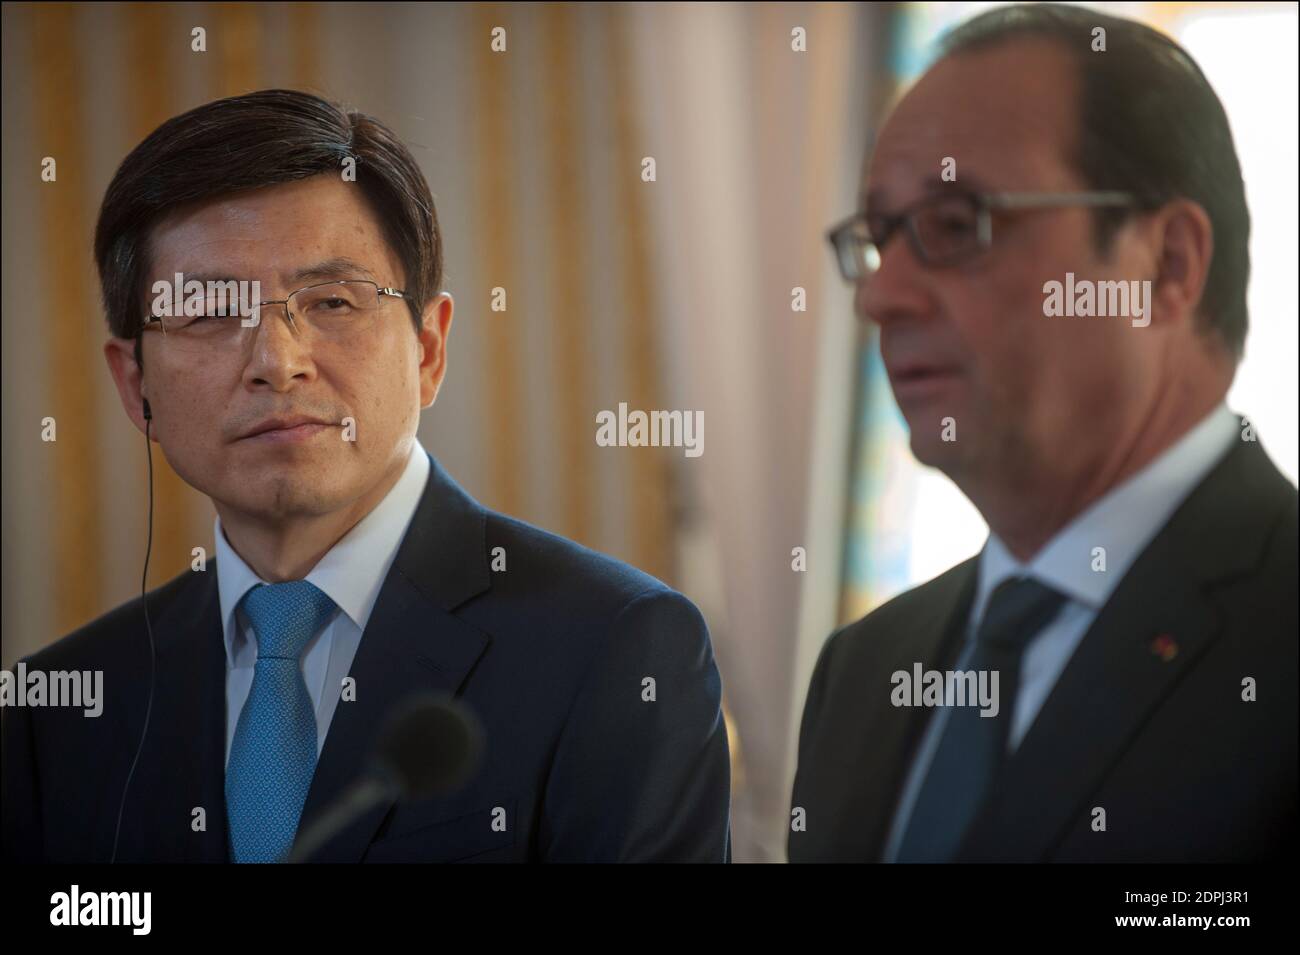 French President Francois Hollande and Prime Minister of South Korea Hwang Kyo-ahn during a joint press conference as part of a reception to officially launch the France-South Korea Year, at the Elysee Palace in Paris, France on September 18, 2015. Photo by Khanh Renaud/ABACAPRESS.COM Stock Photo